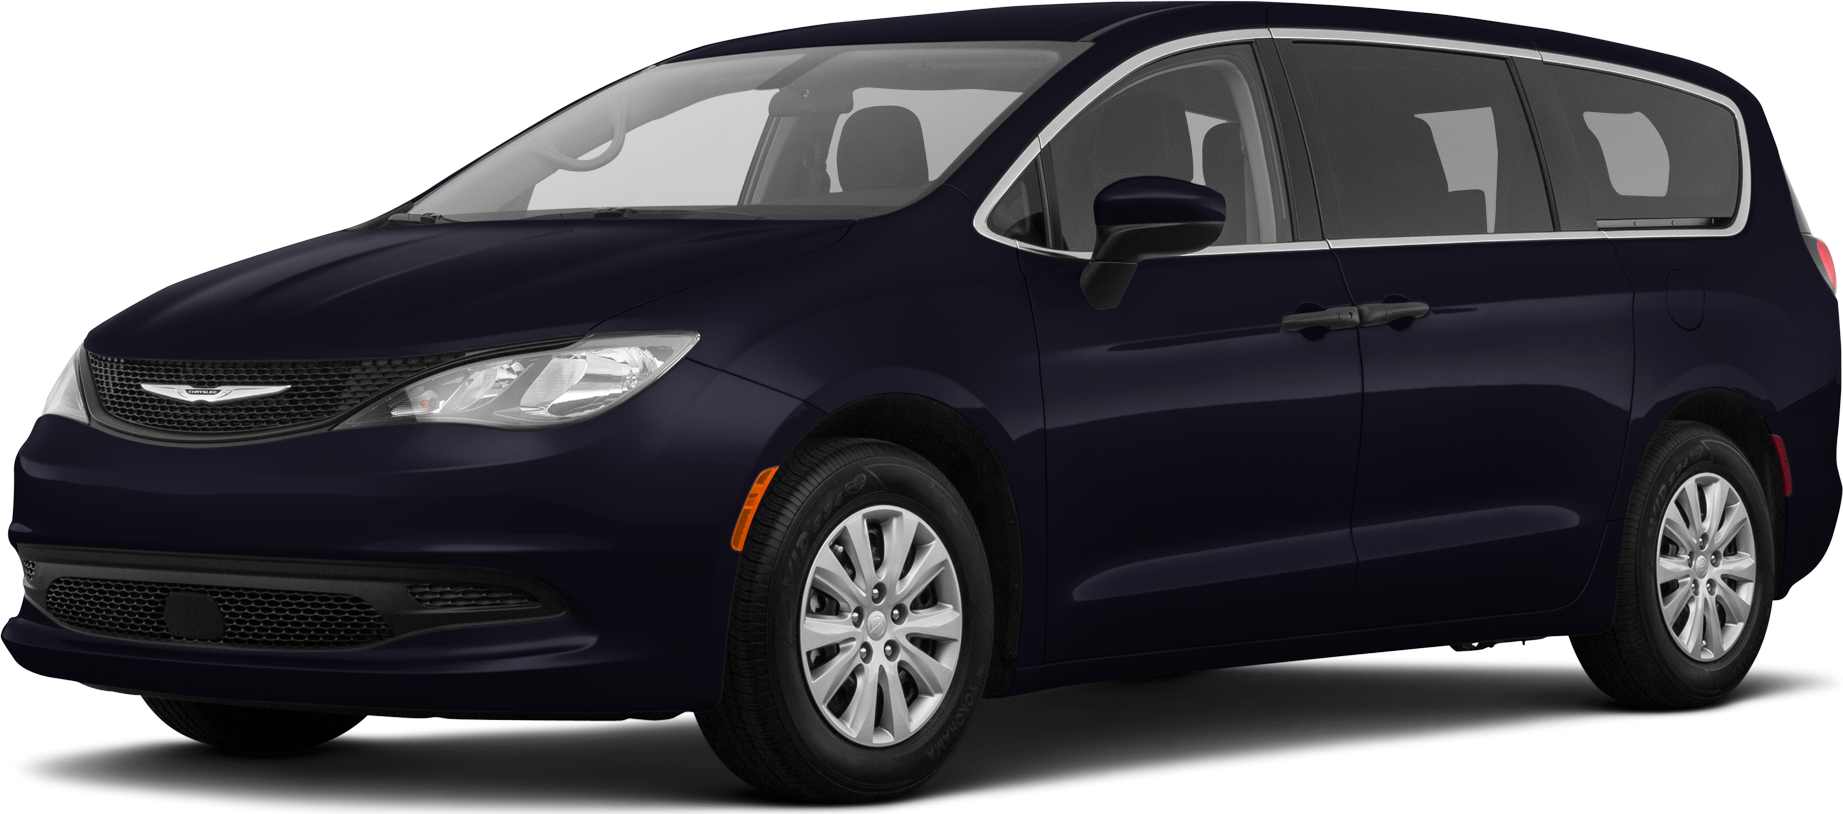 2022 chrysler voyager lx review